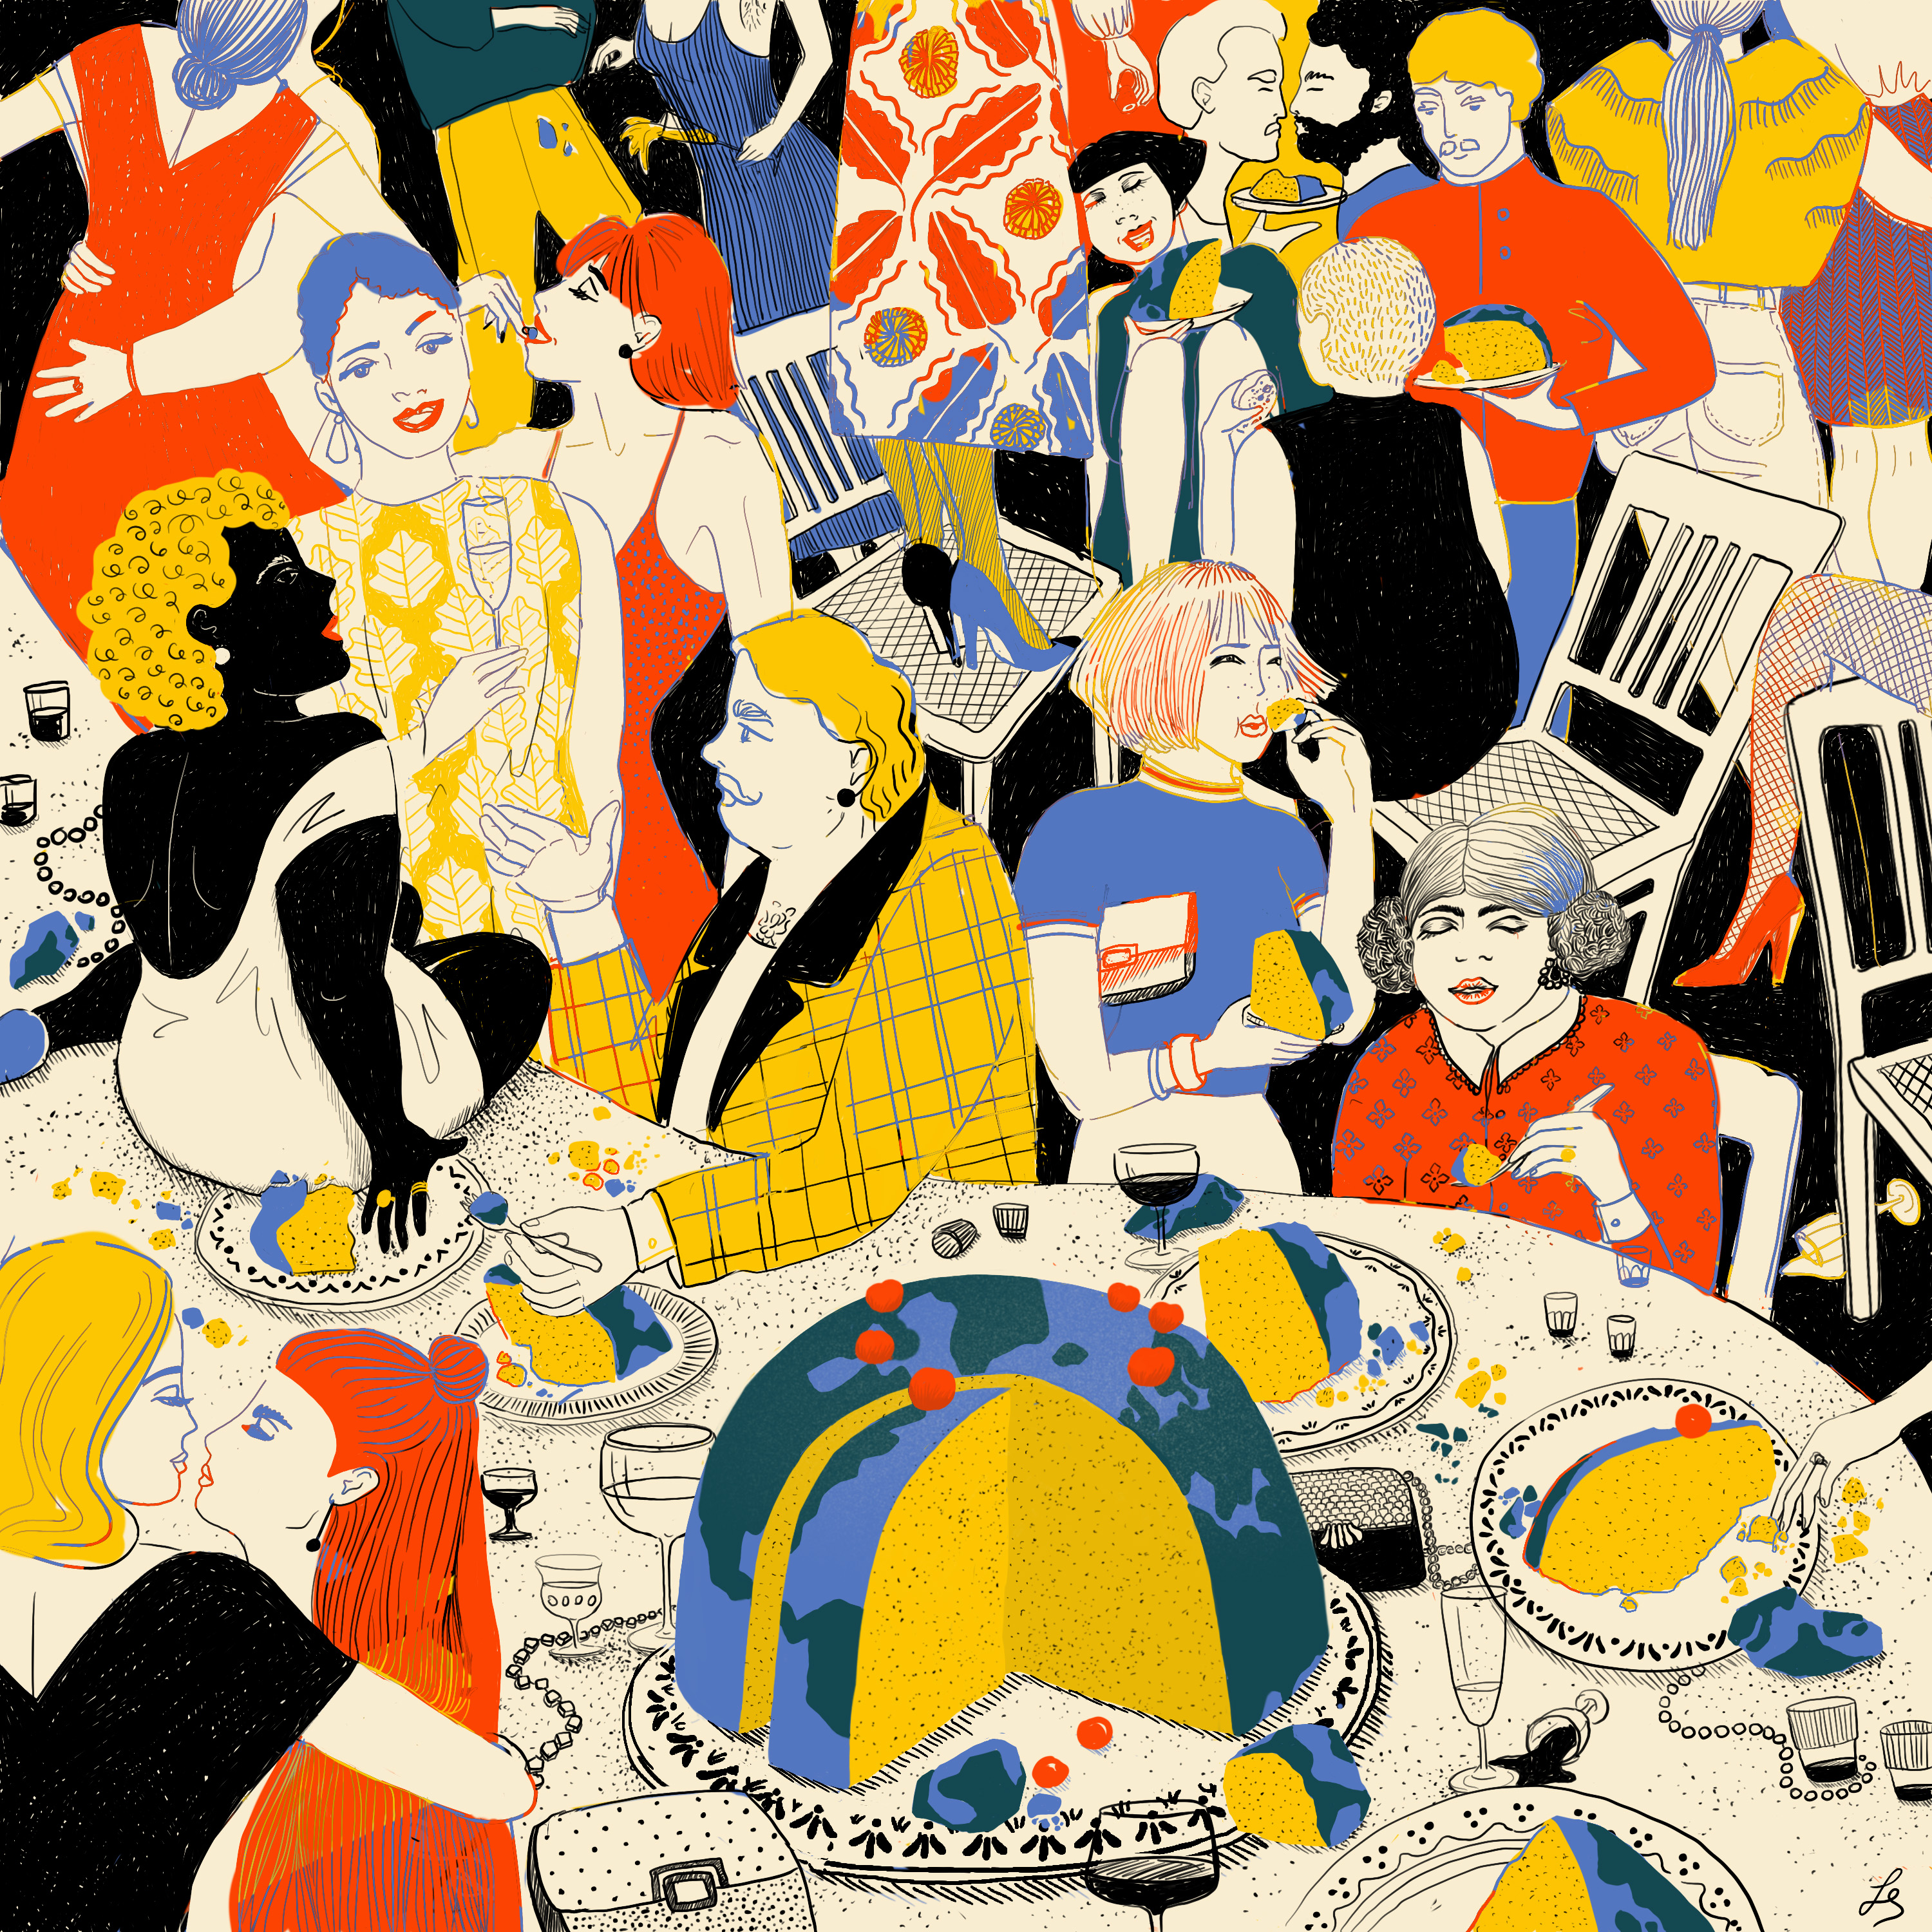 Lisa Seitz : Everyone wants a piece of that cake - World illustration ...